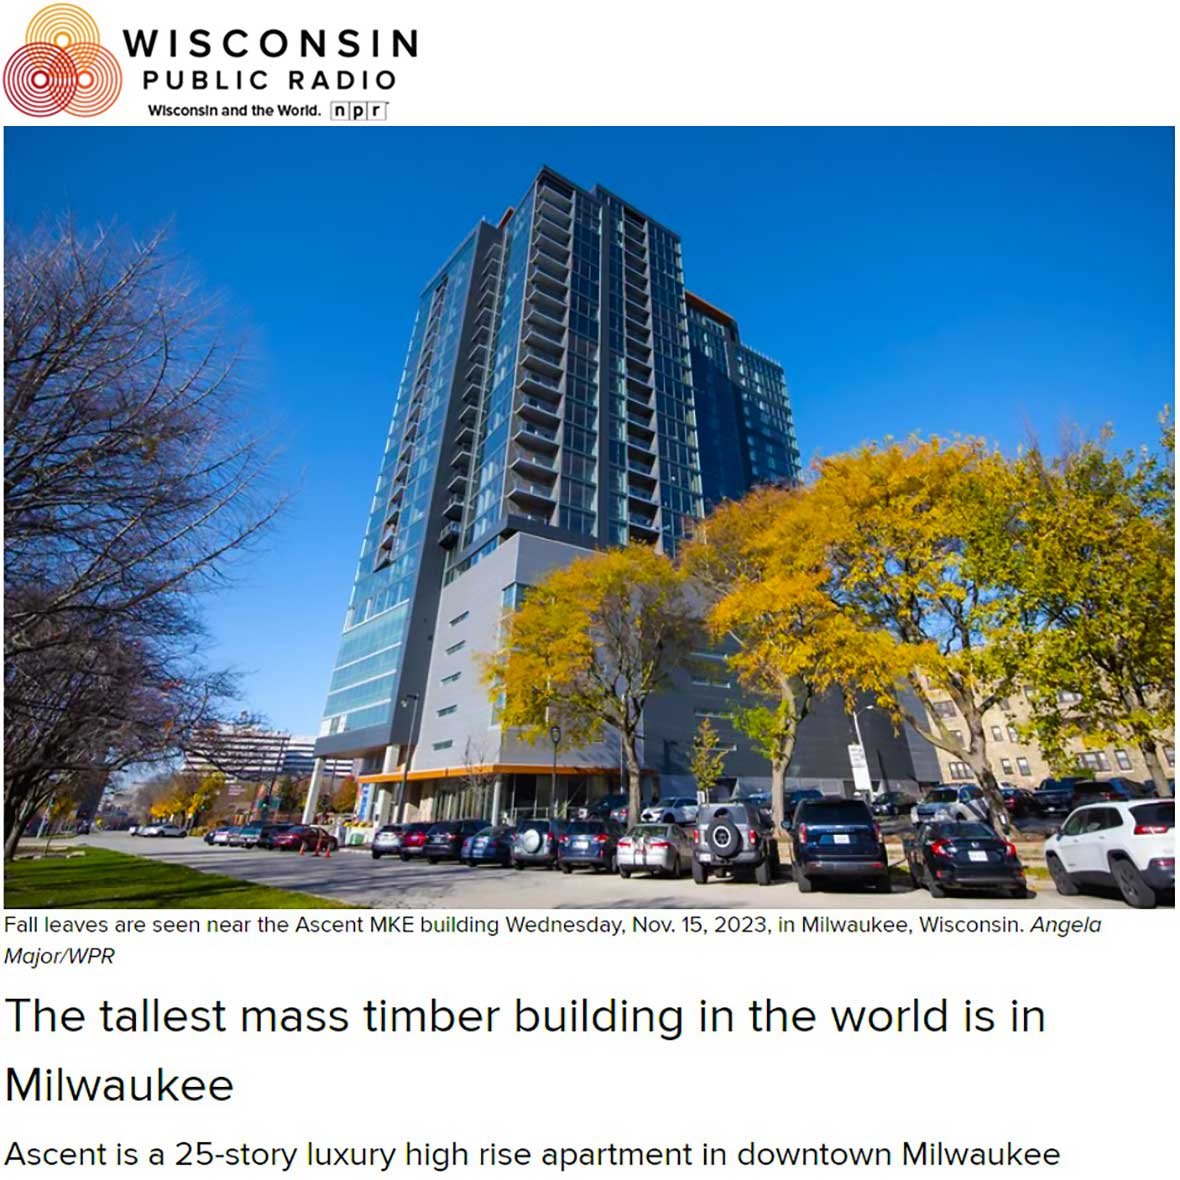 Ascent MKE building in Milwaukee Wisconsin as feature image for Wisconsin Public Radio Nov. 15 2023 article